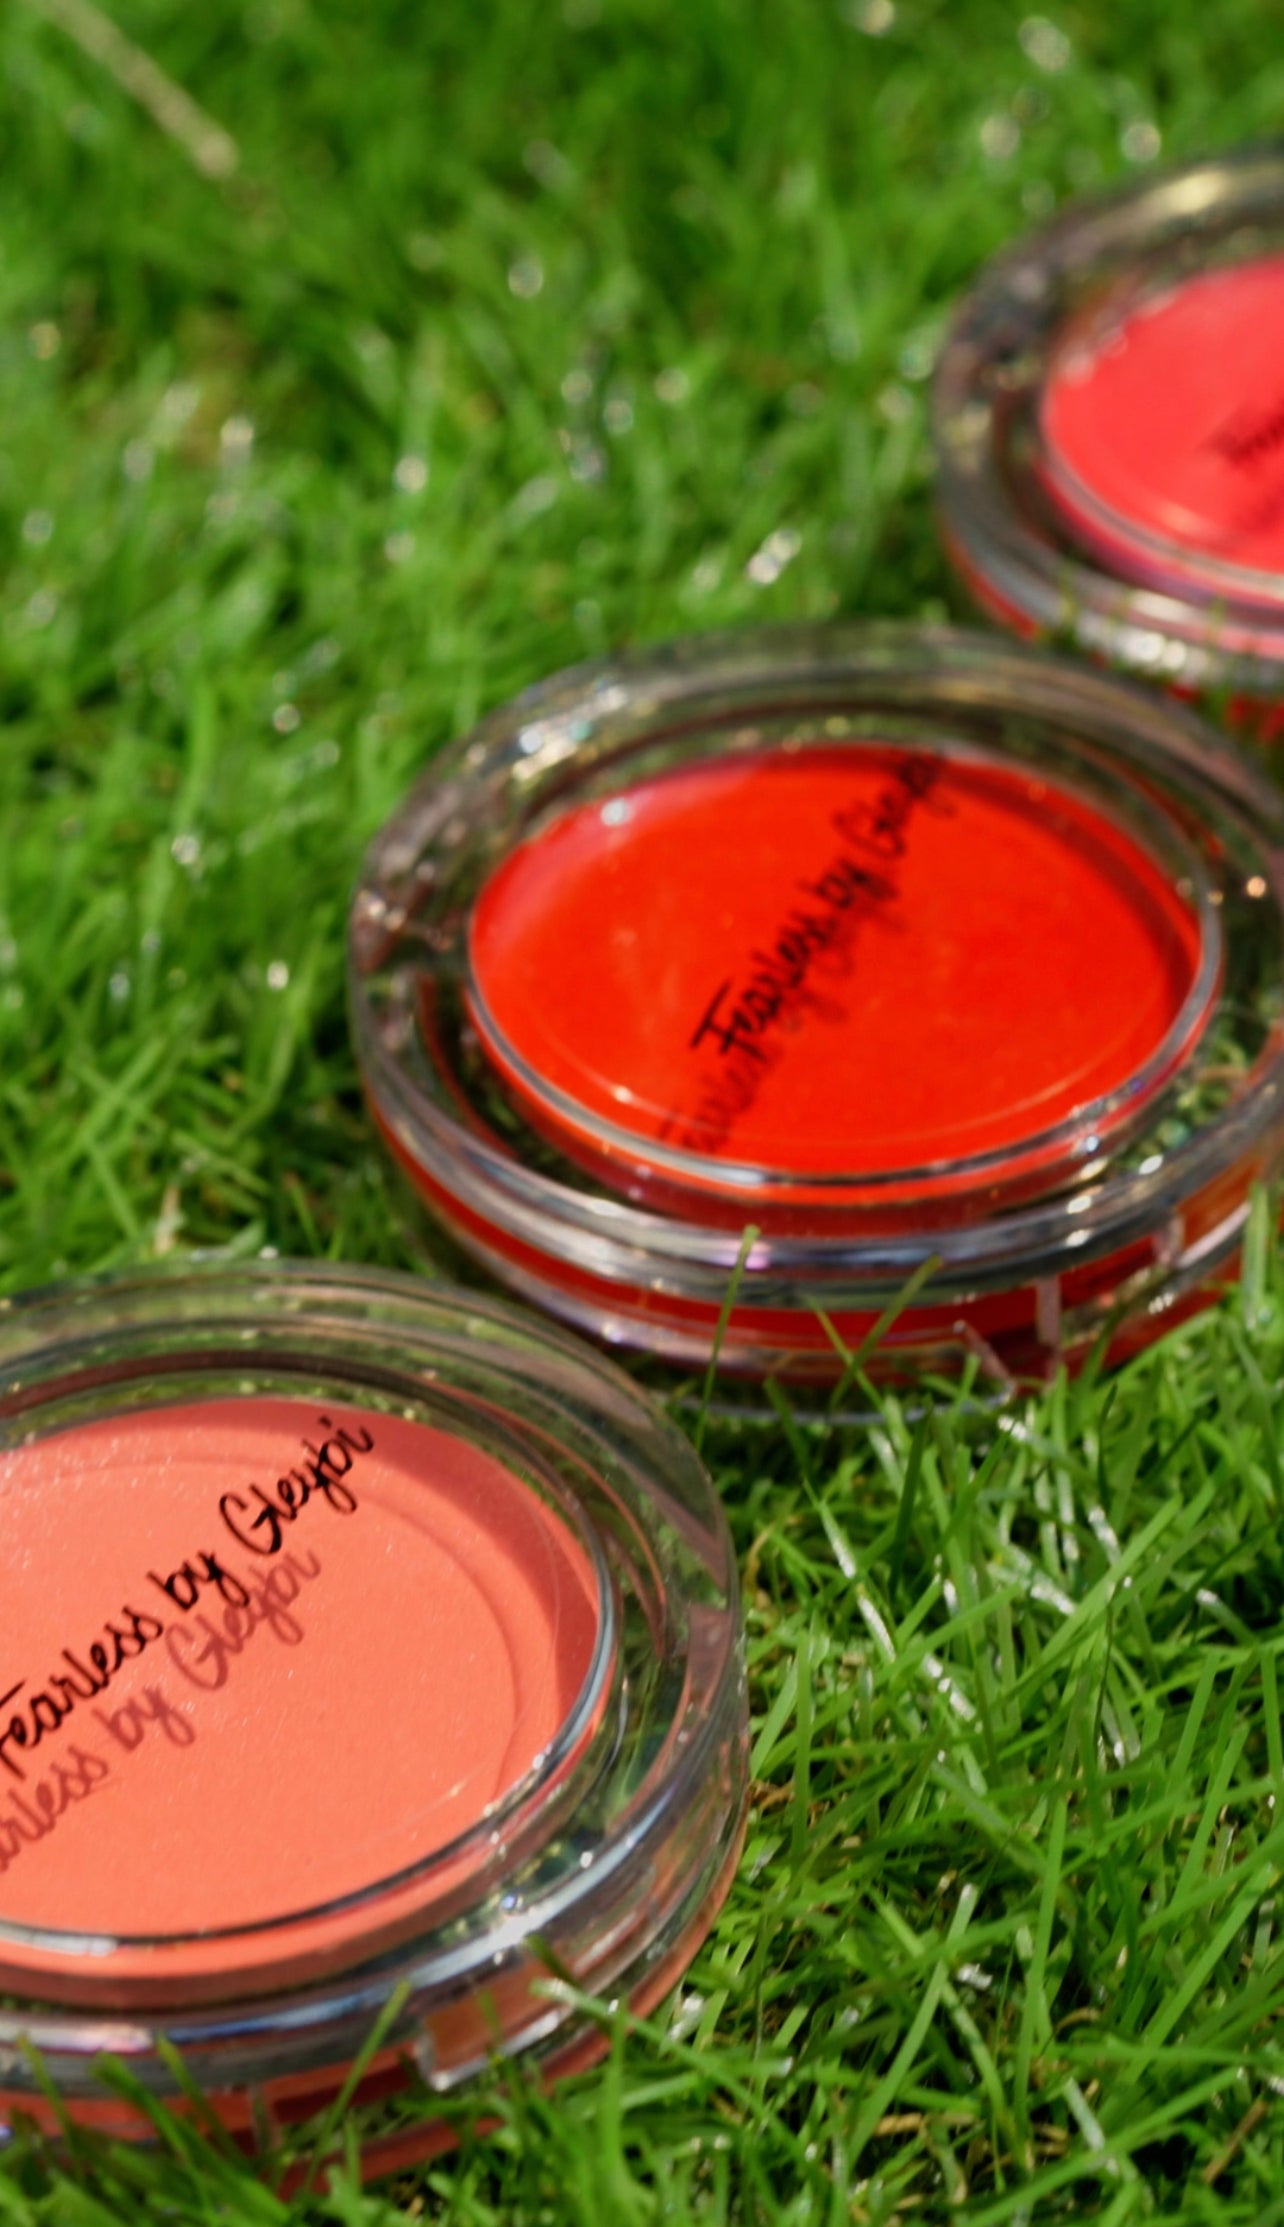 Fearless Cream Blushes